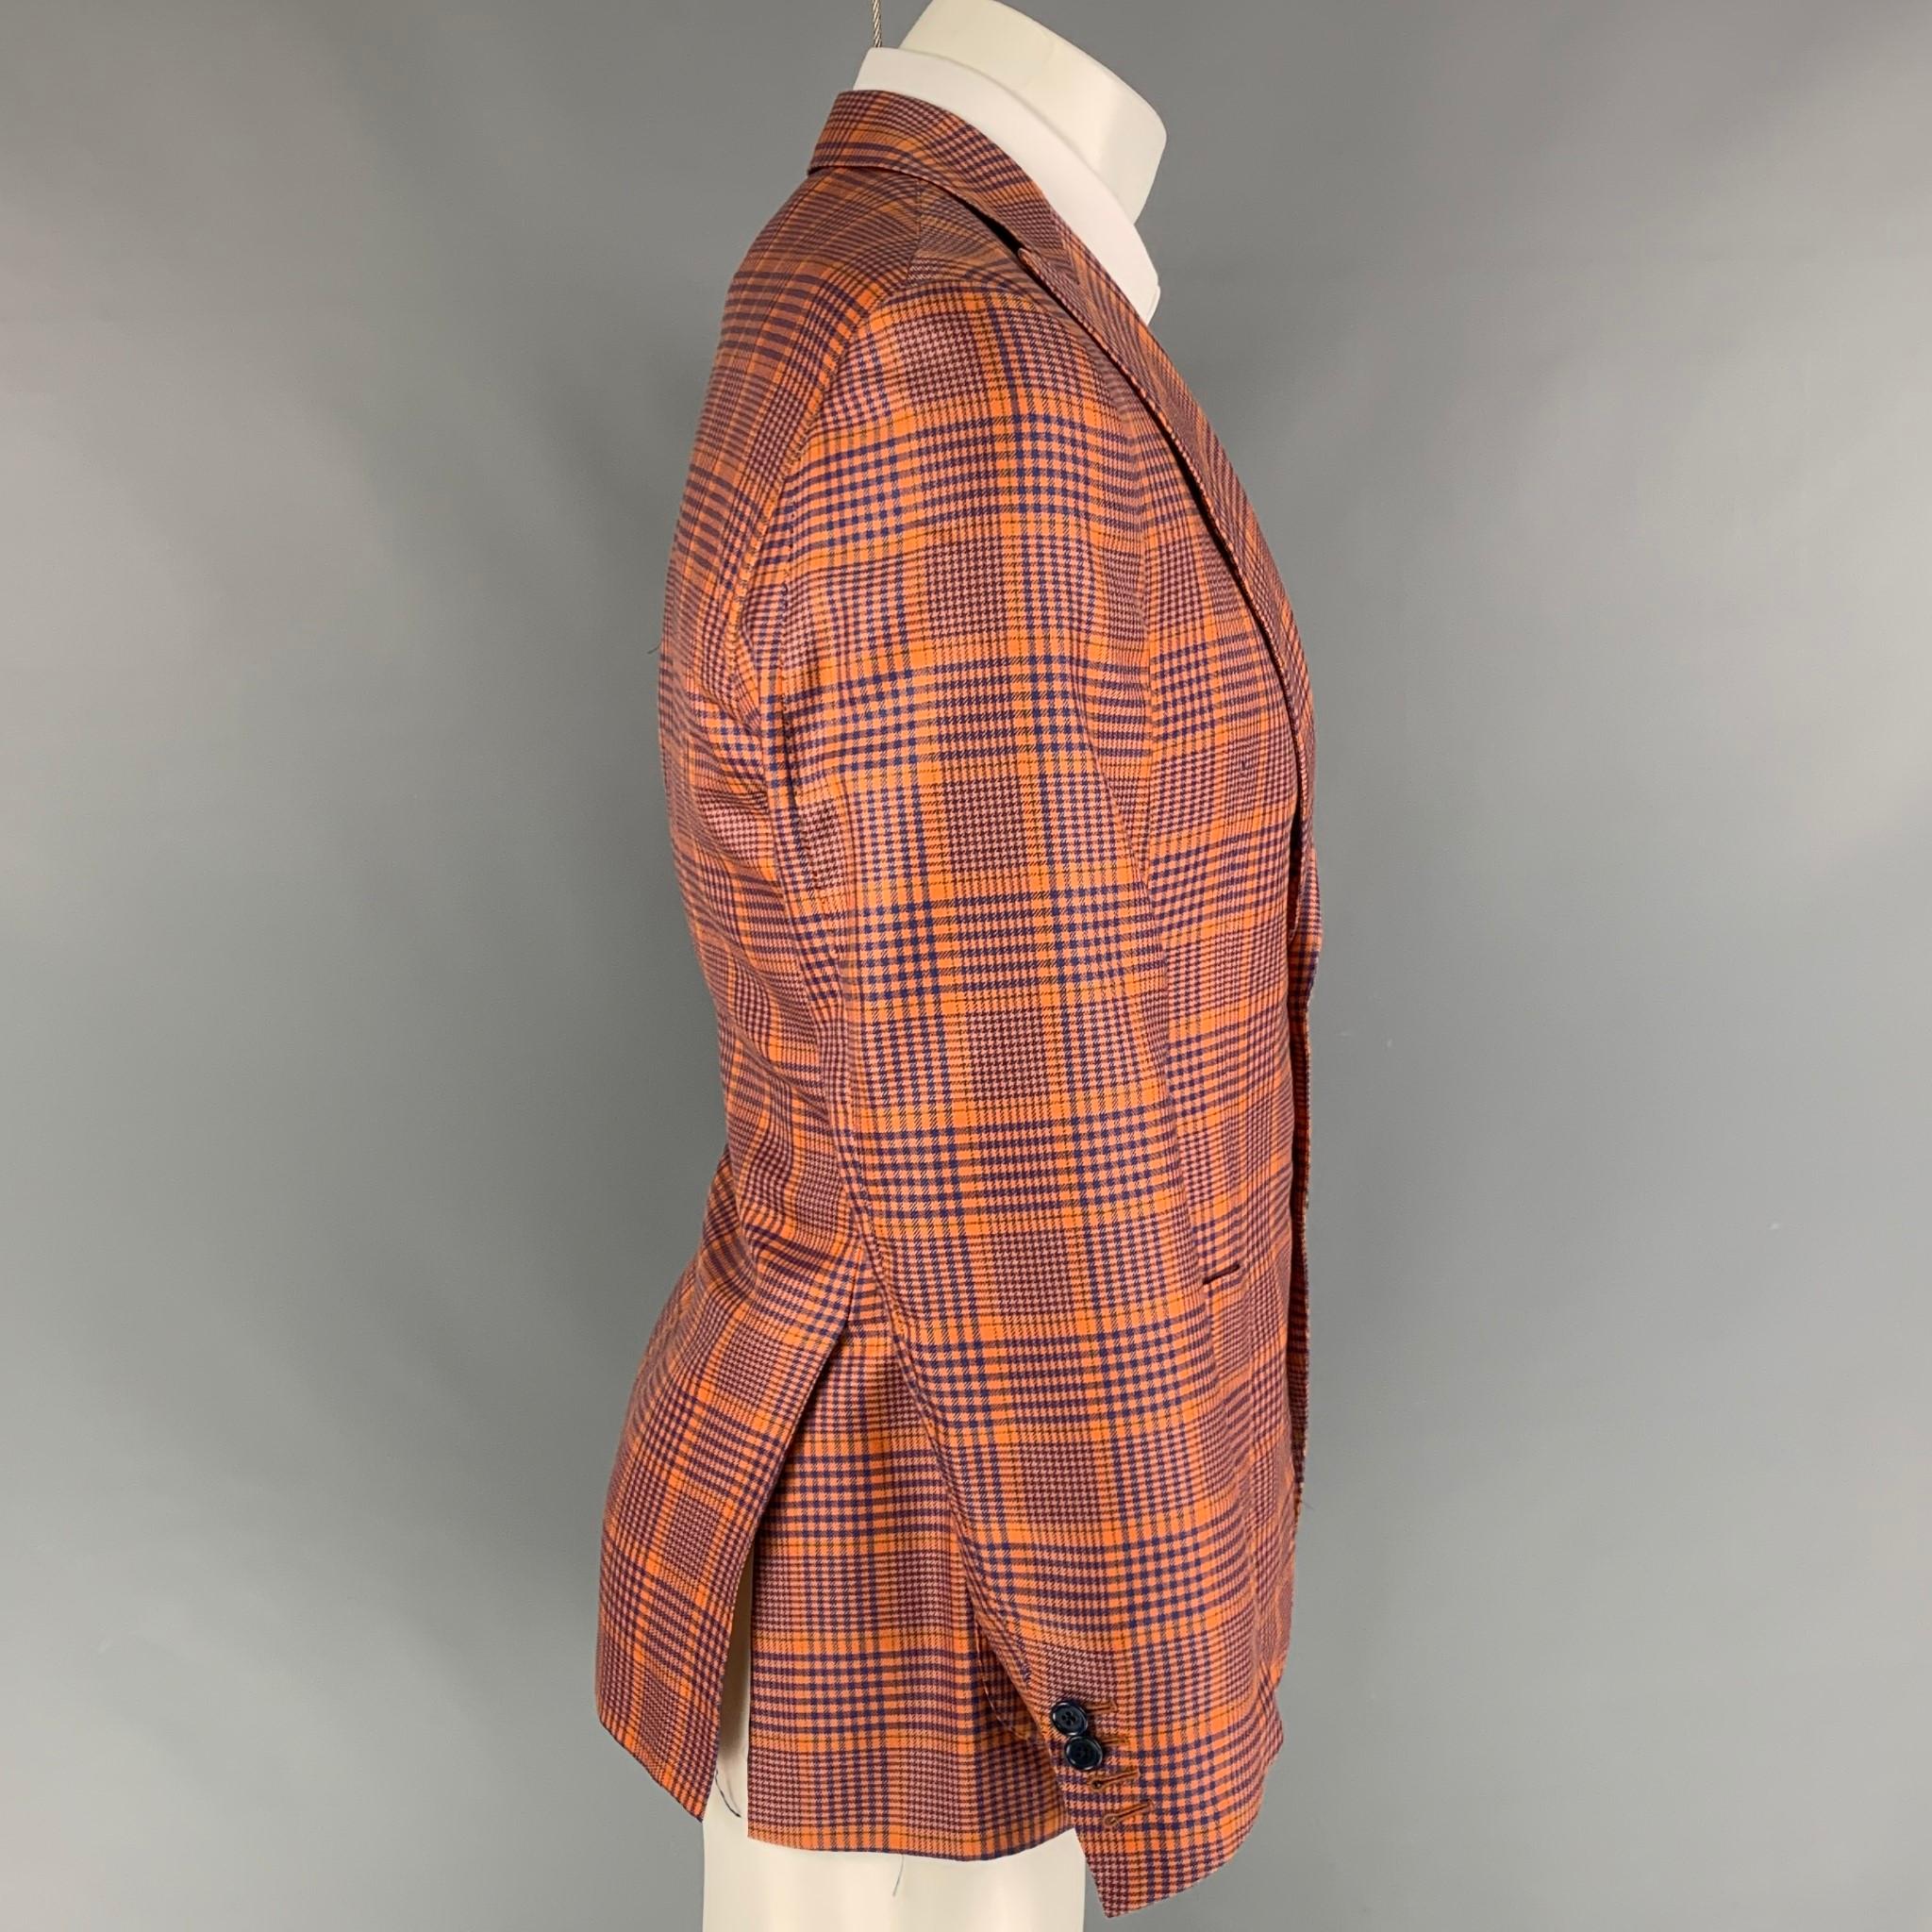 SARTORIA PARTENOPEA spot coat comes in a orange & blue houndstooth cashmere / silk with a full liner featuring a peak lapel, patch pockets, double back vent, and a double button closure. Made in Italy. 

Very Good Pre-Owned Condition.
Marked: Size